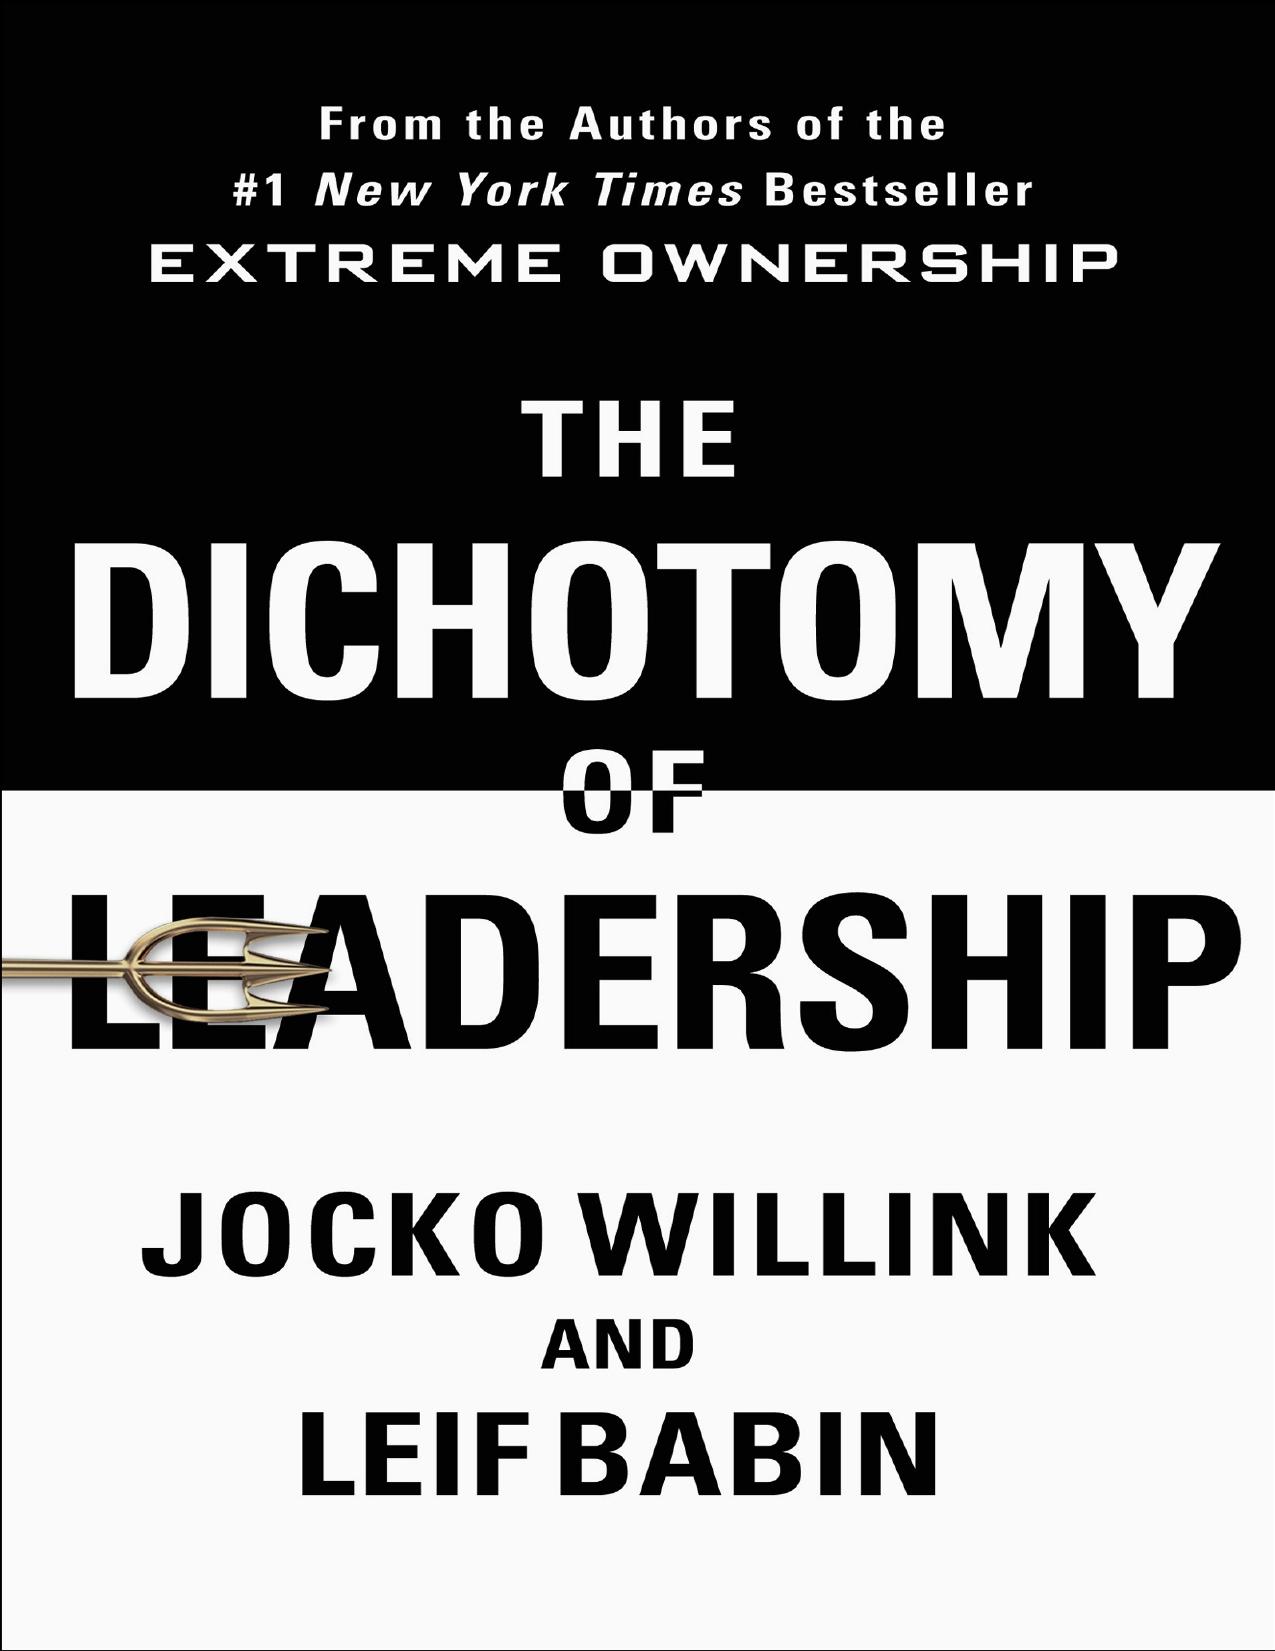 The Dichotomy of Leadership: Balancing the Challenges of Extreme Ownership to Lead and Win - PDFDrive.com